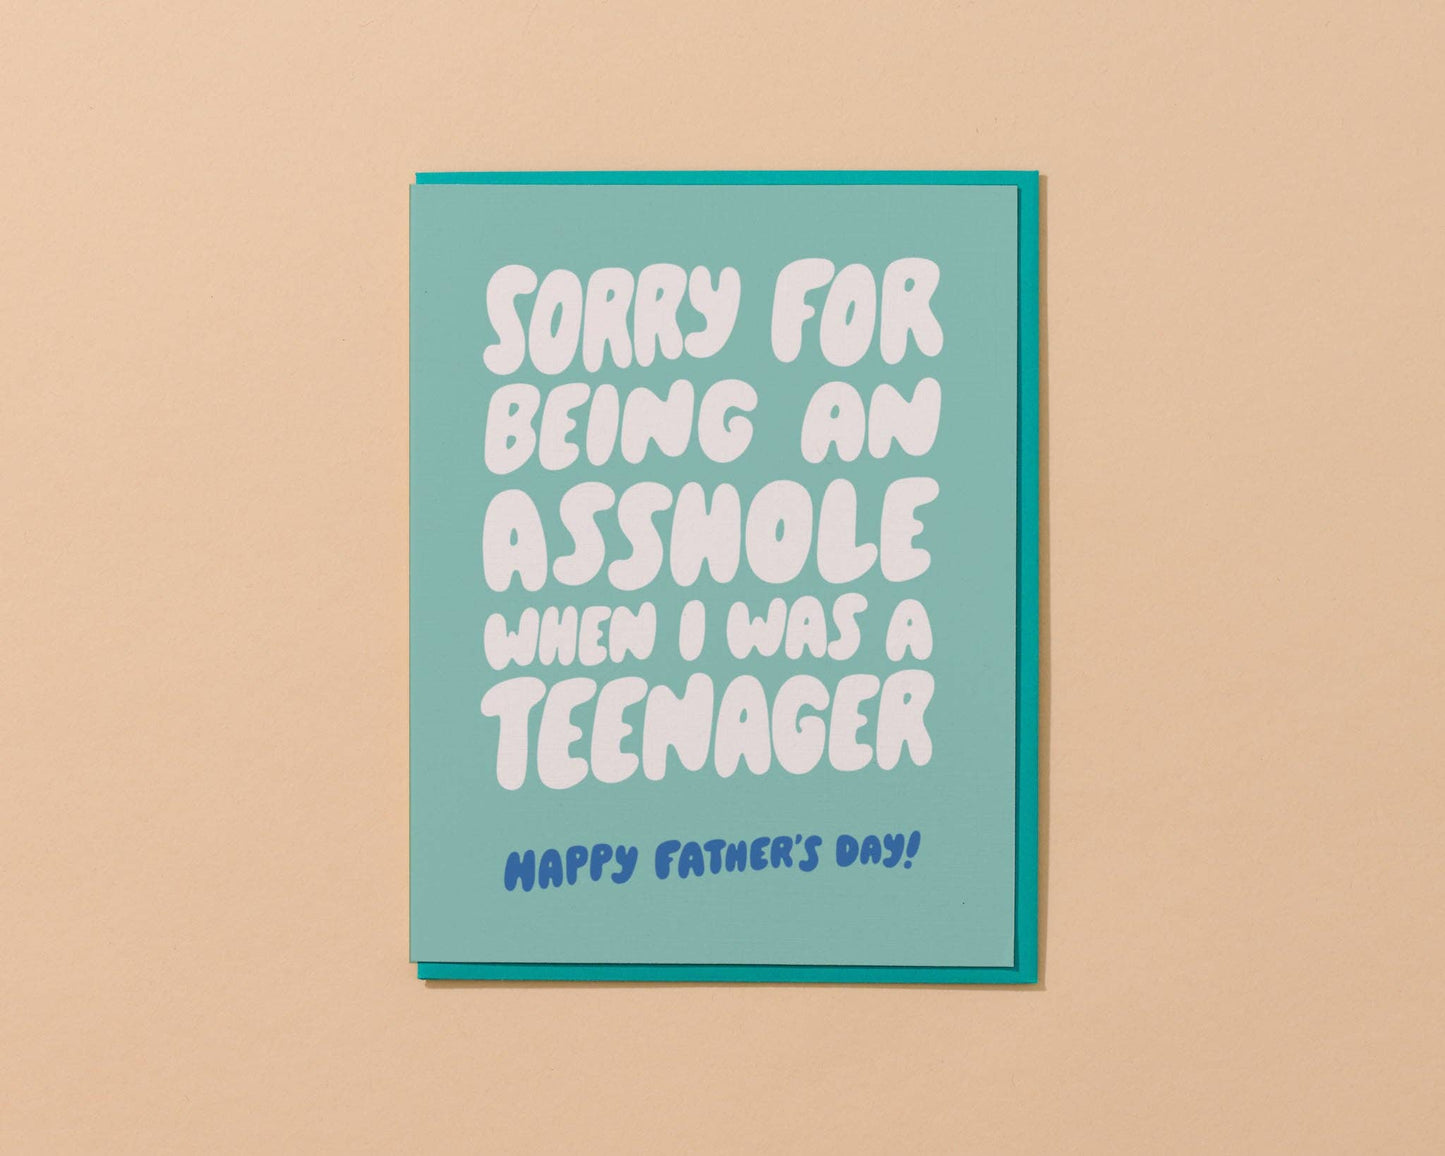 Asshole Teenager (Father's Day) Funny Card